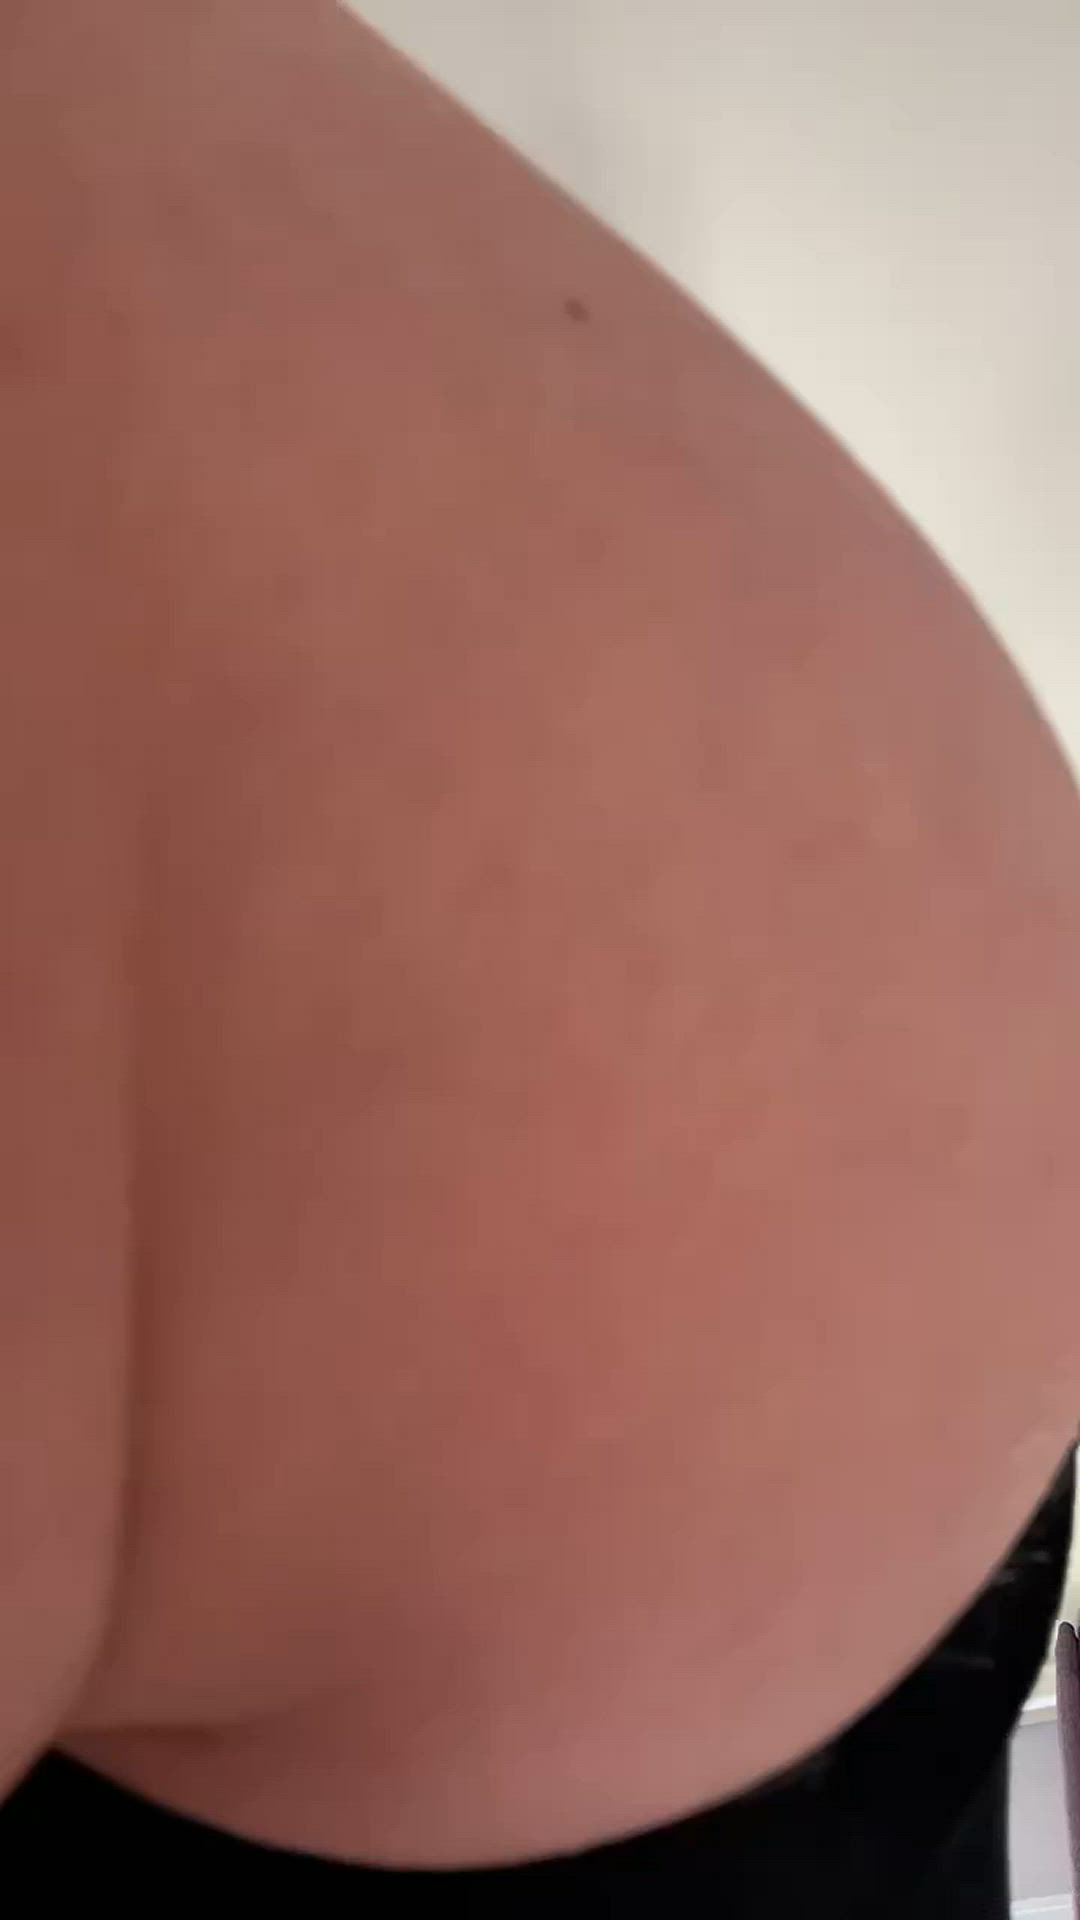 Ass porn video with onlyfans model stacyquartz <strong>@stacyquartzvip</strong>